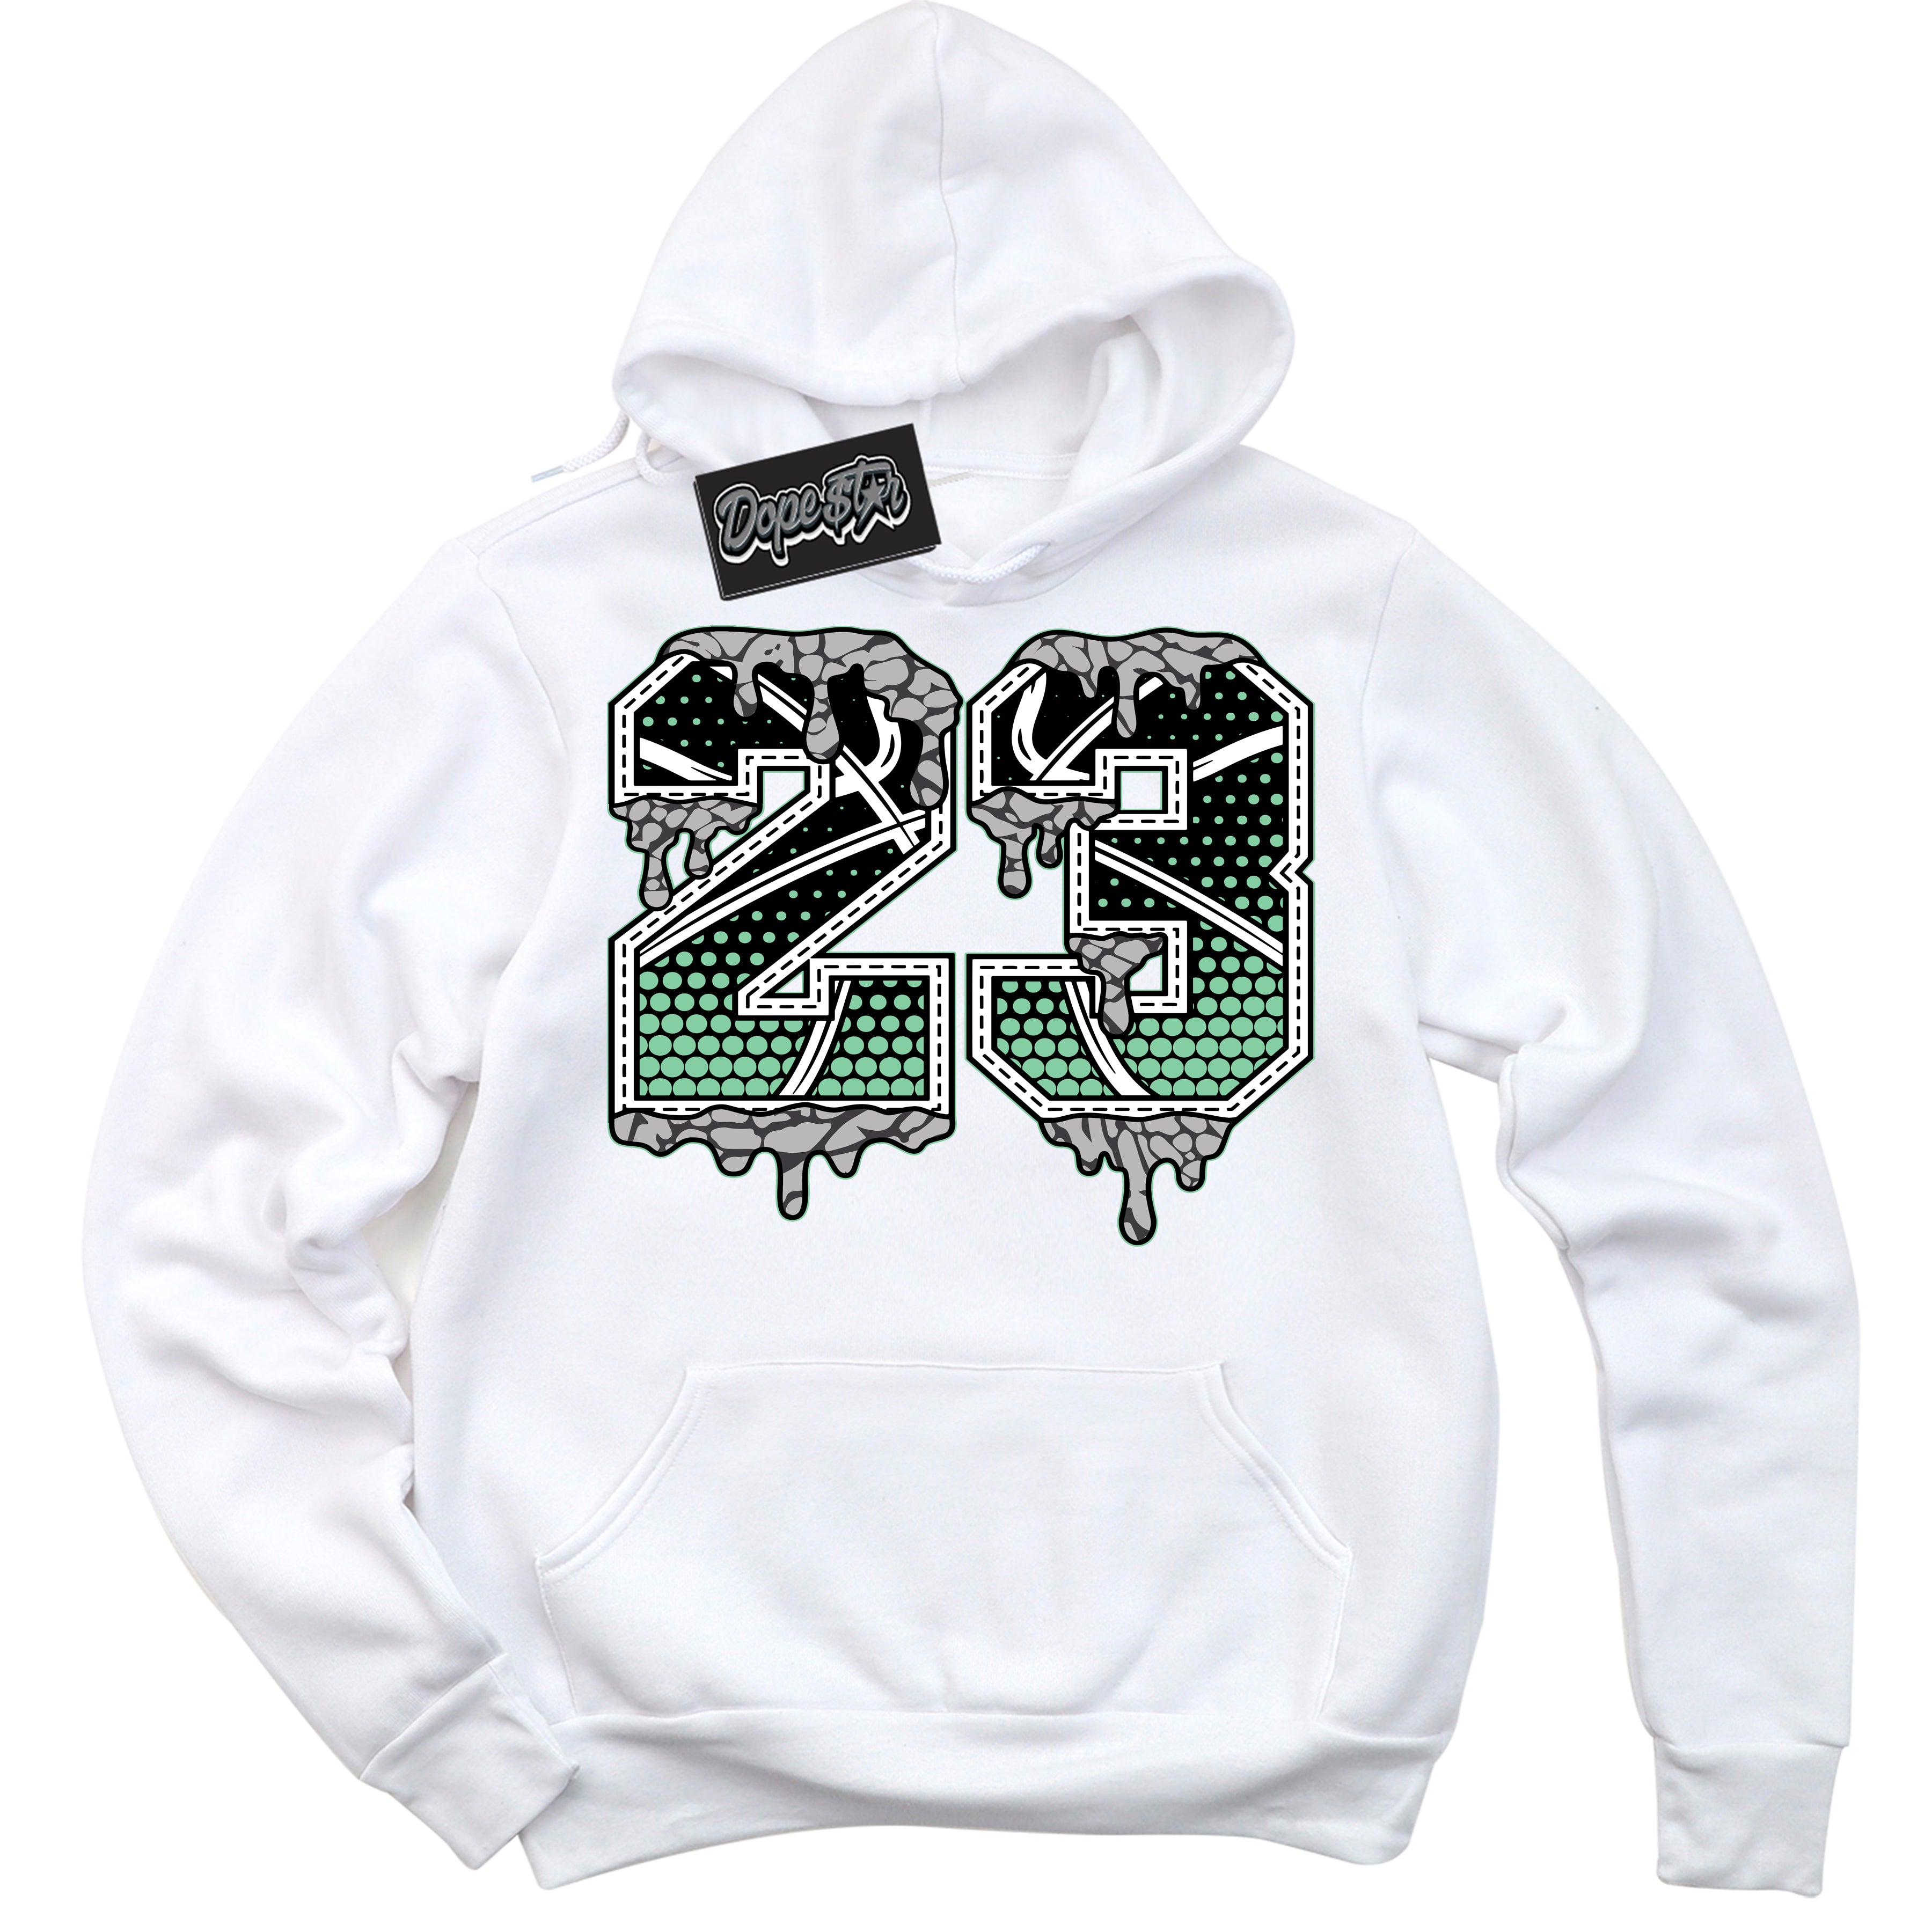 Cool White Graphic DopeStar Hoodie with “ 23 Ball “ print, that perfectly matches Green Glow 3s sneakers